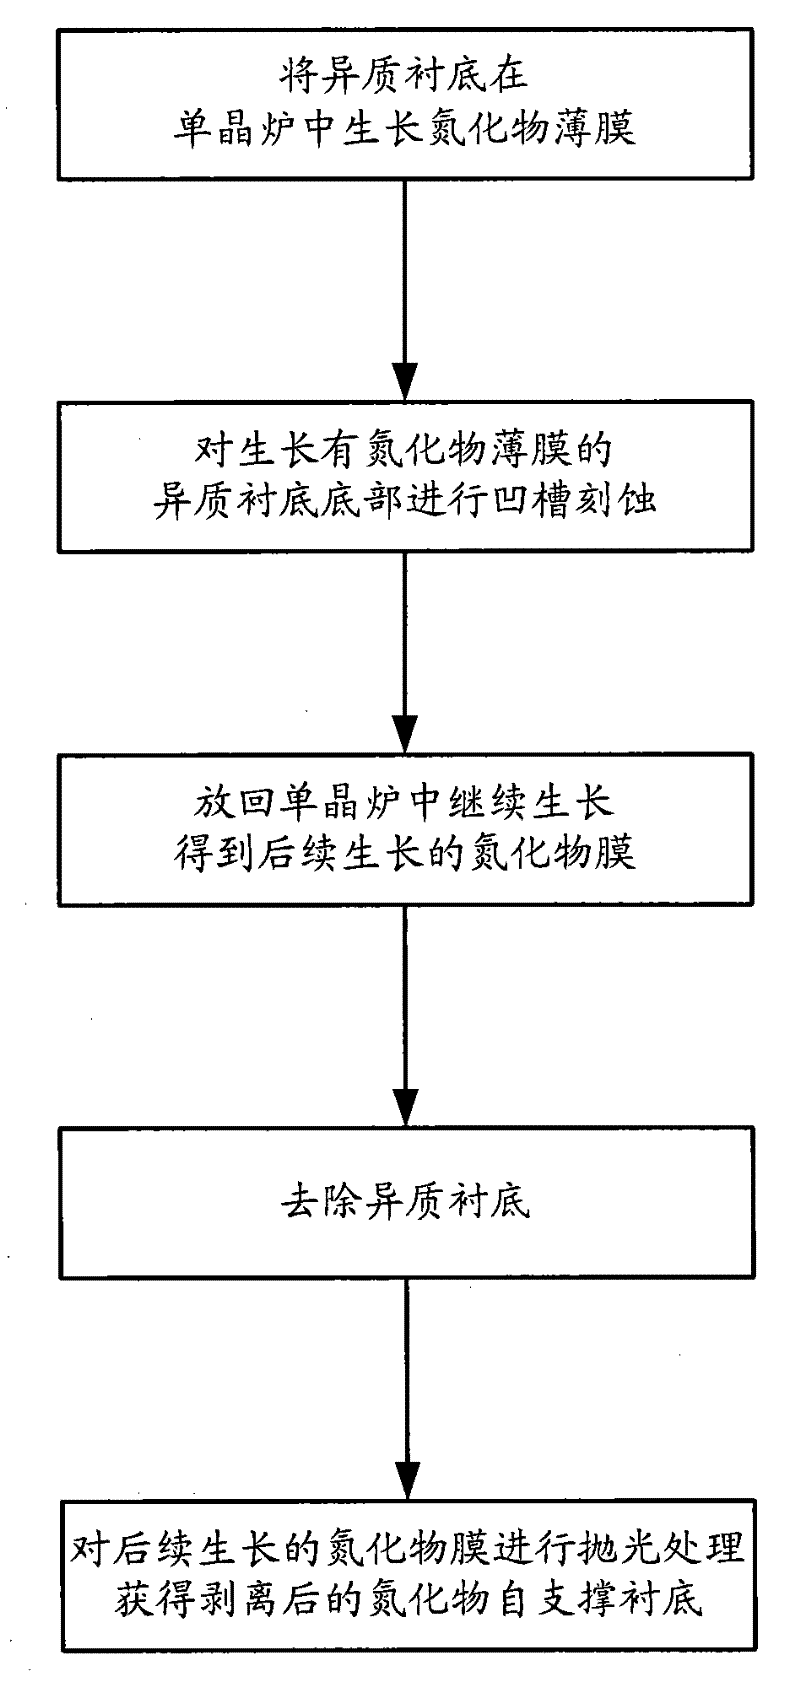 Method for preparing nitride self-supported substrate